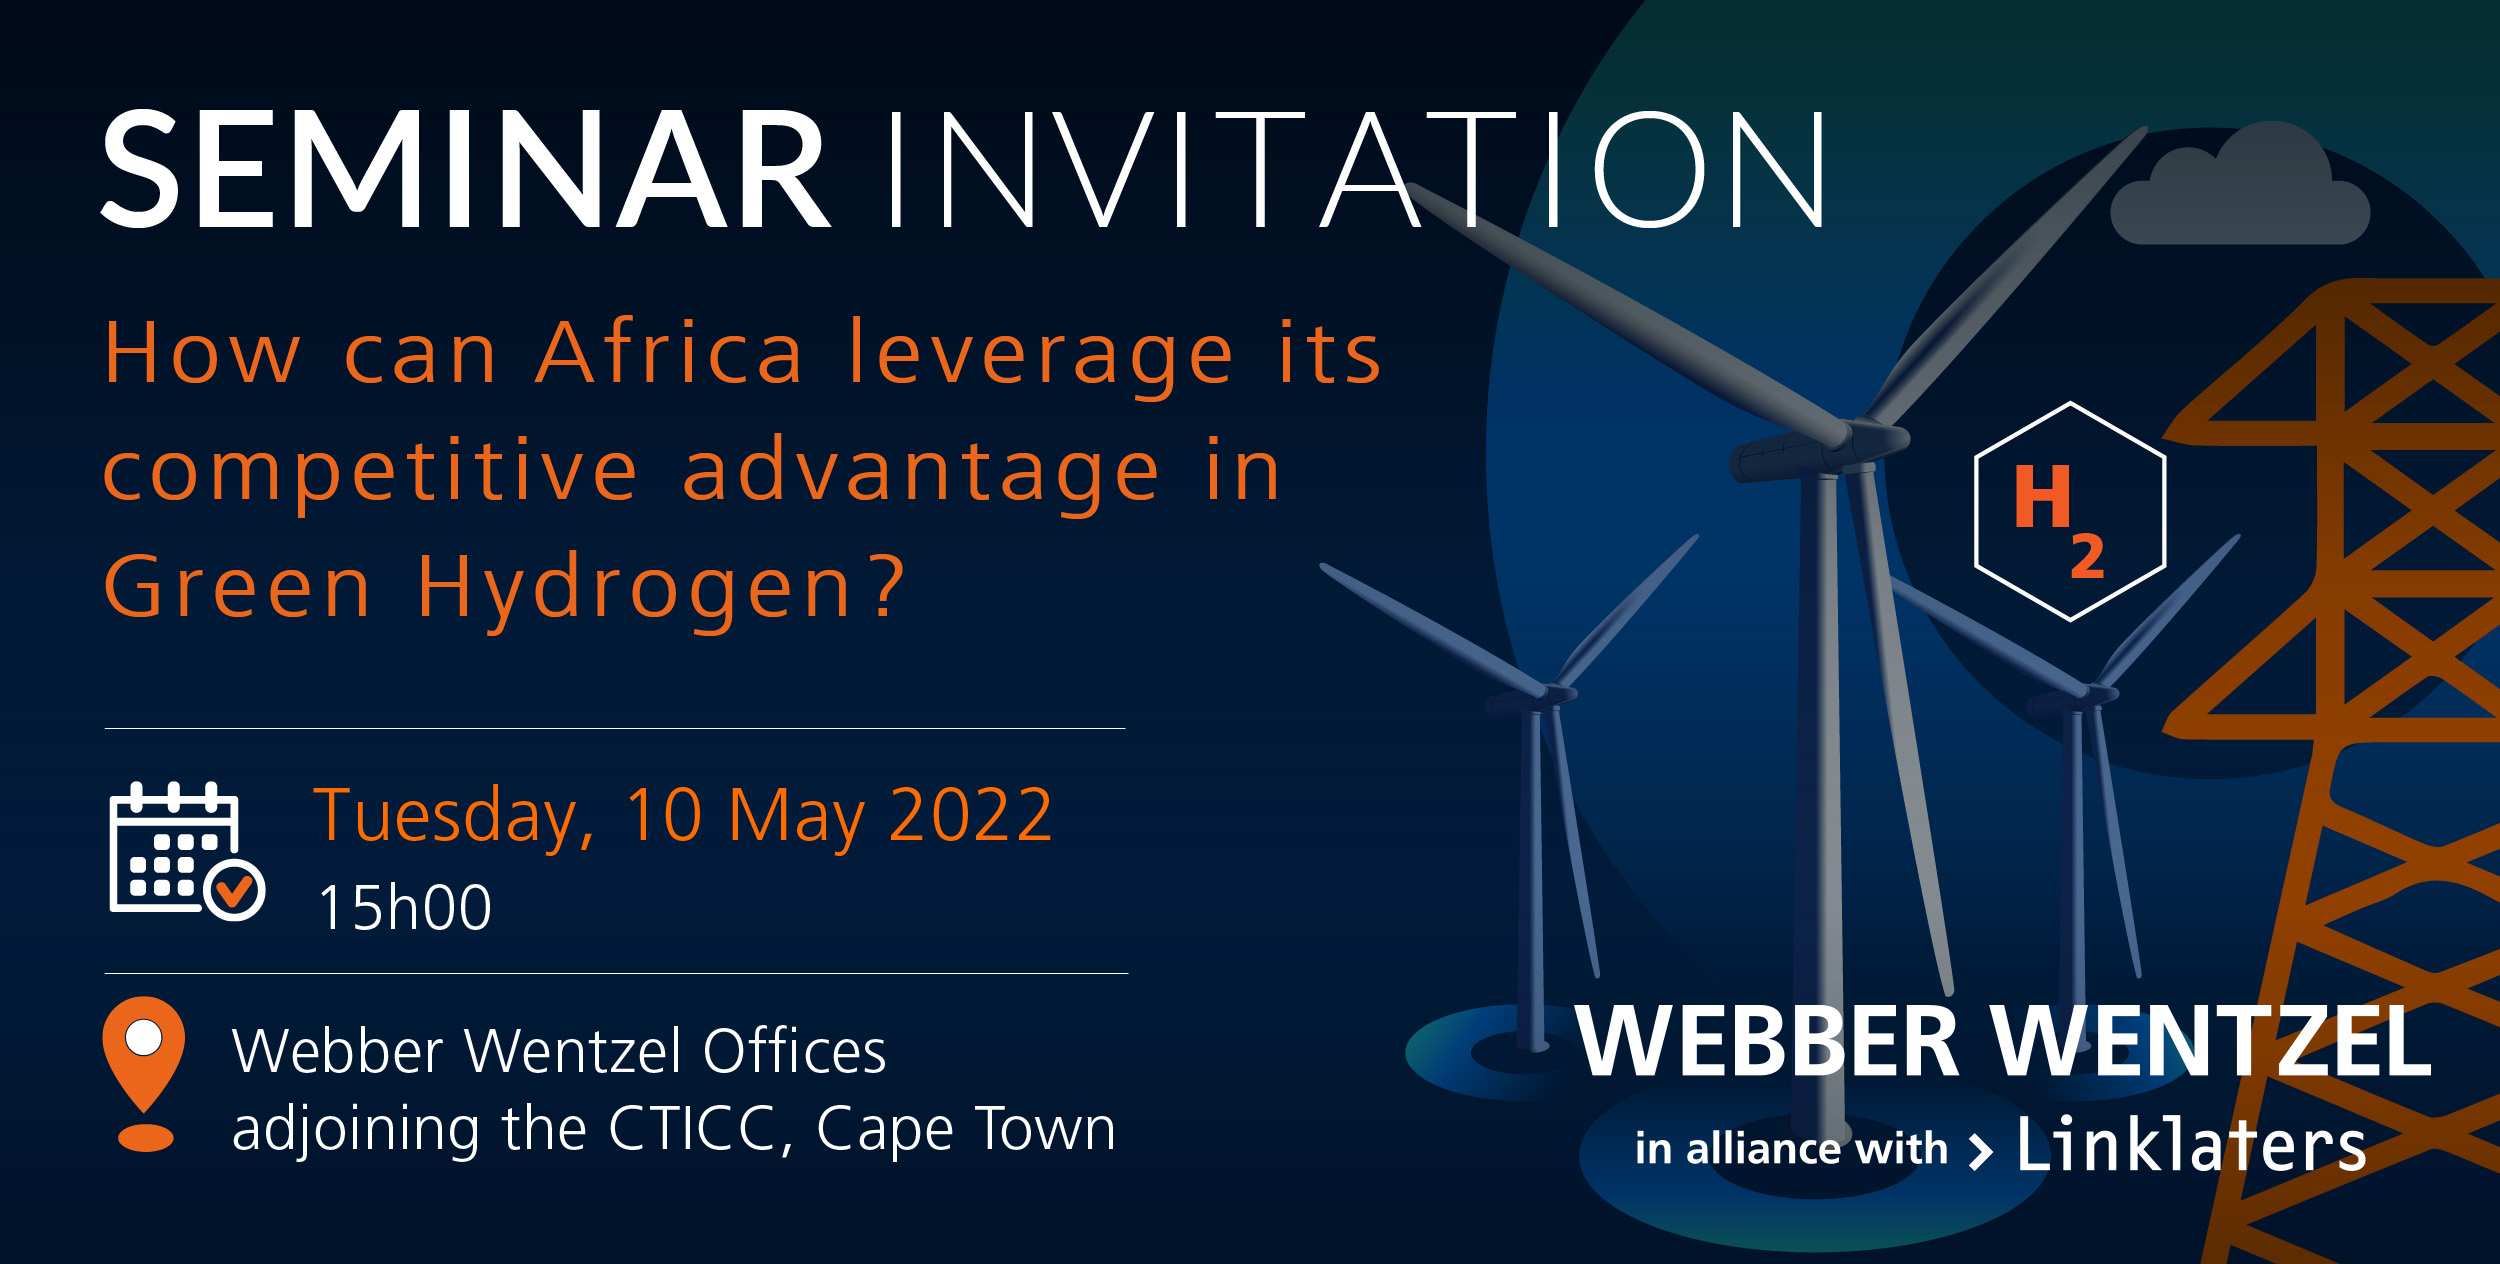 Seminar Invitation - How can Africa leverage its competitive advantage in Green Hydrogen?